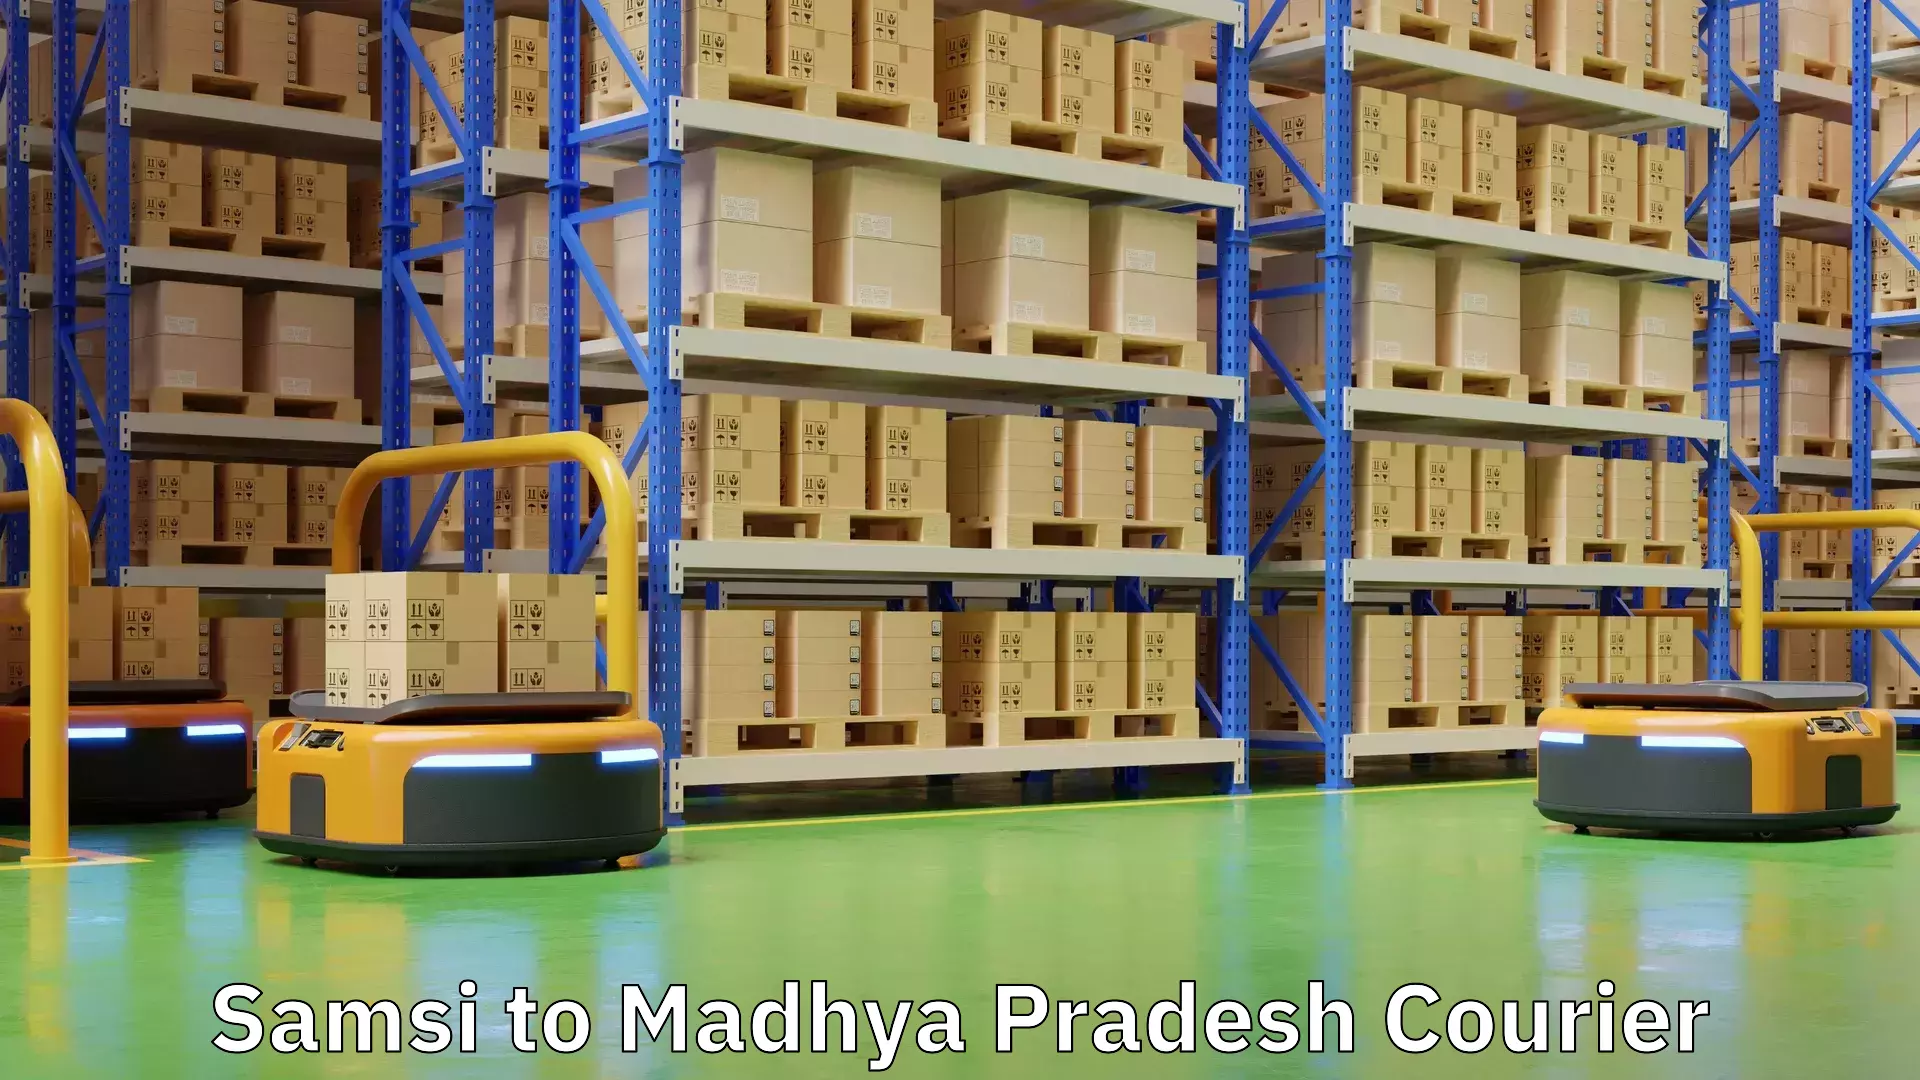 End-to-end delivery in Samsi to Madhya Pradesh